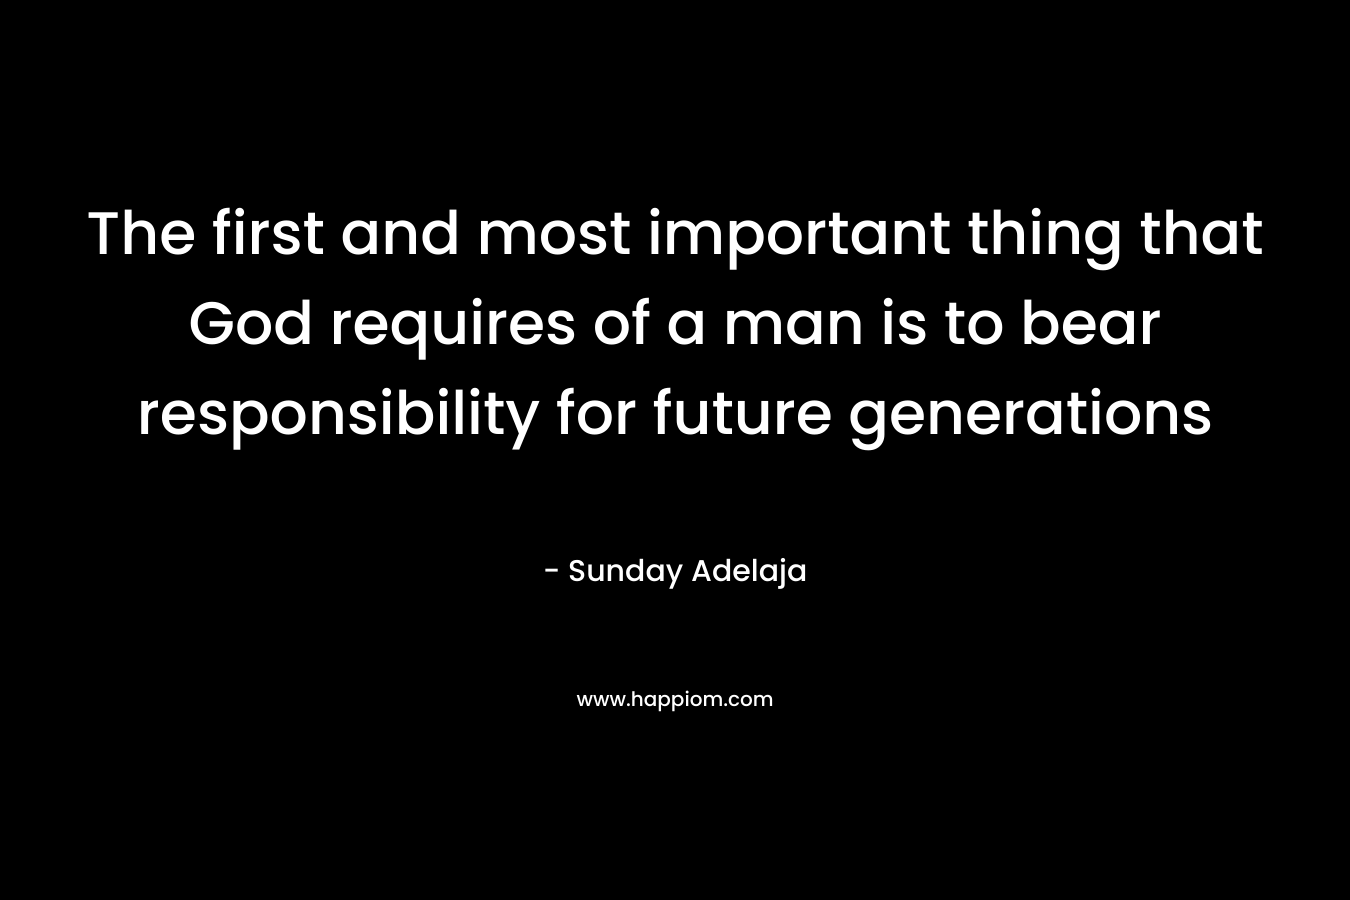 The first and most important thing that God requires of a man is to bear responsibility for future generations